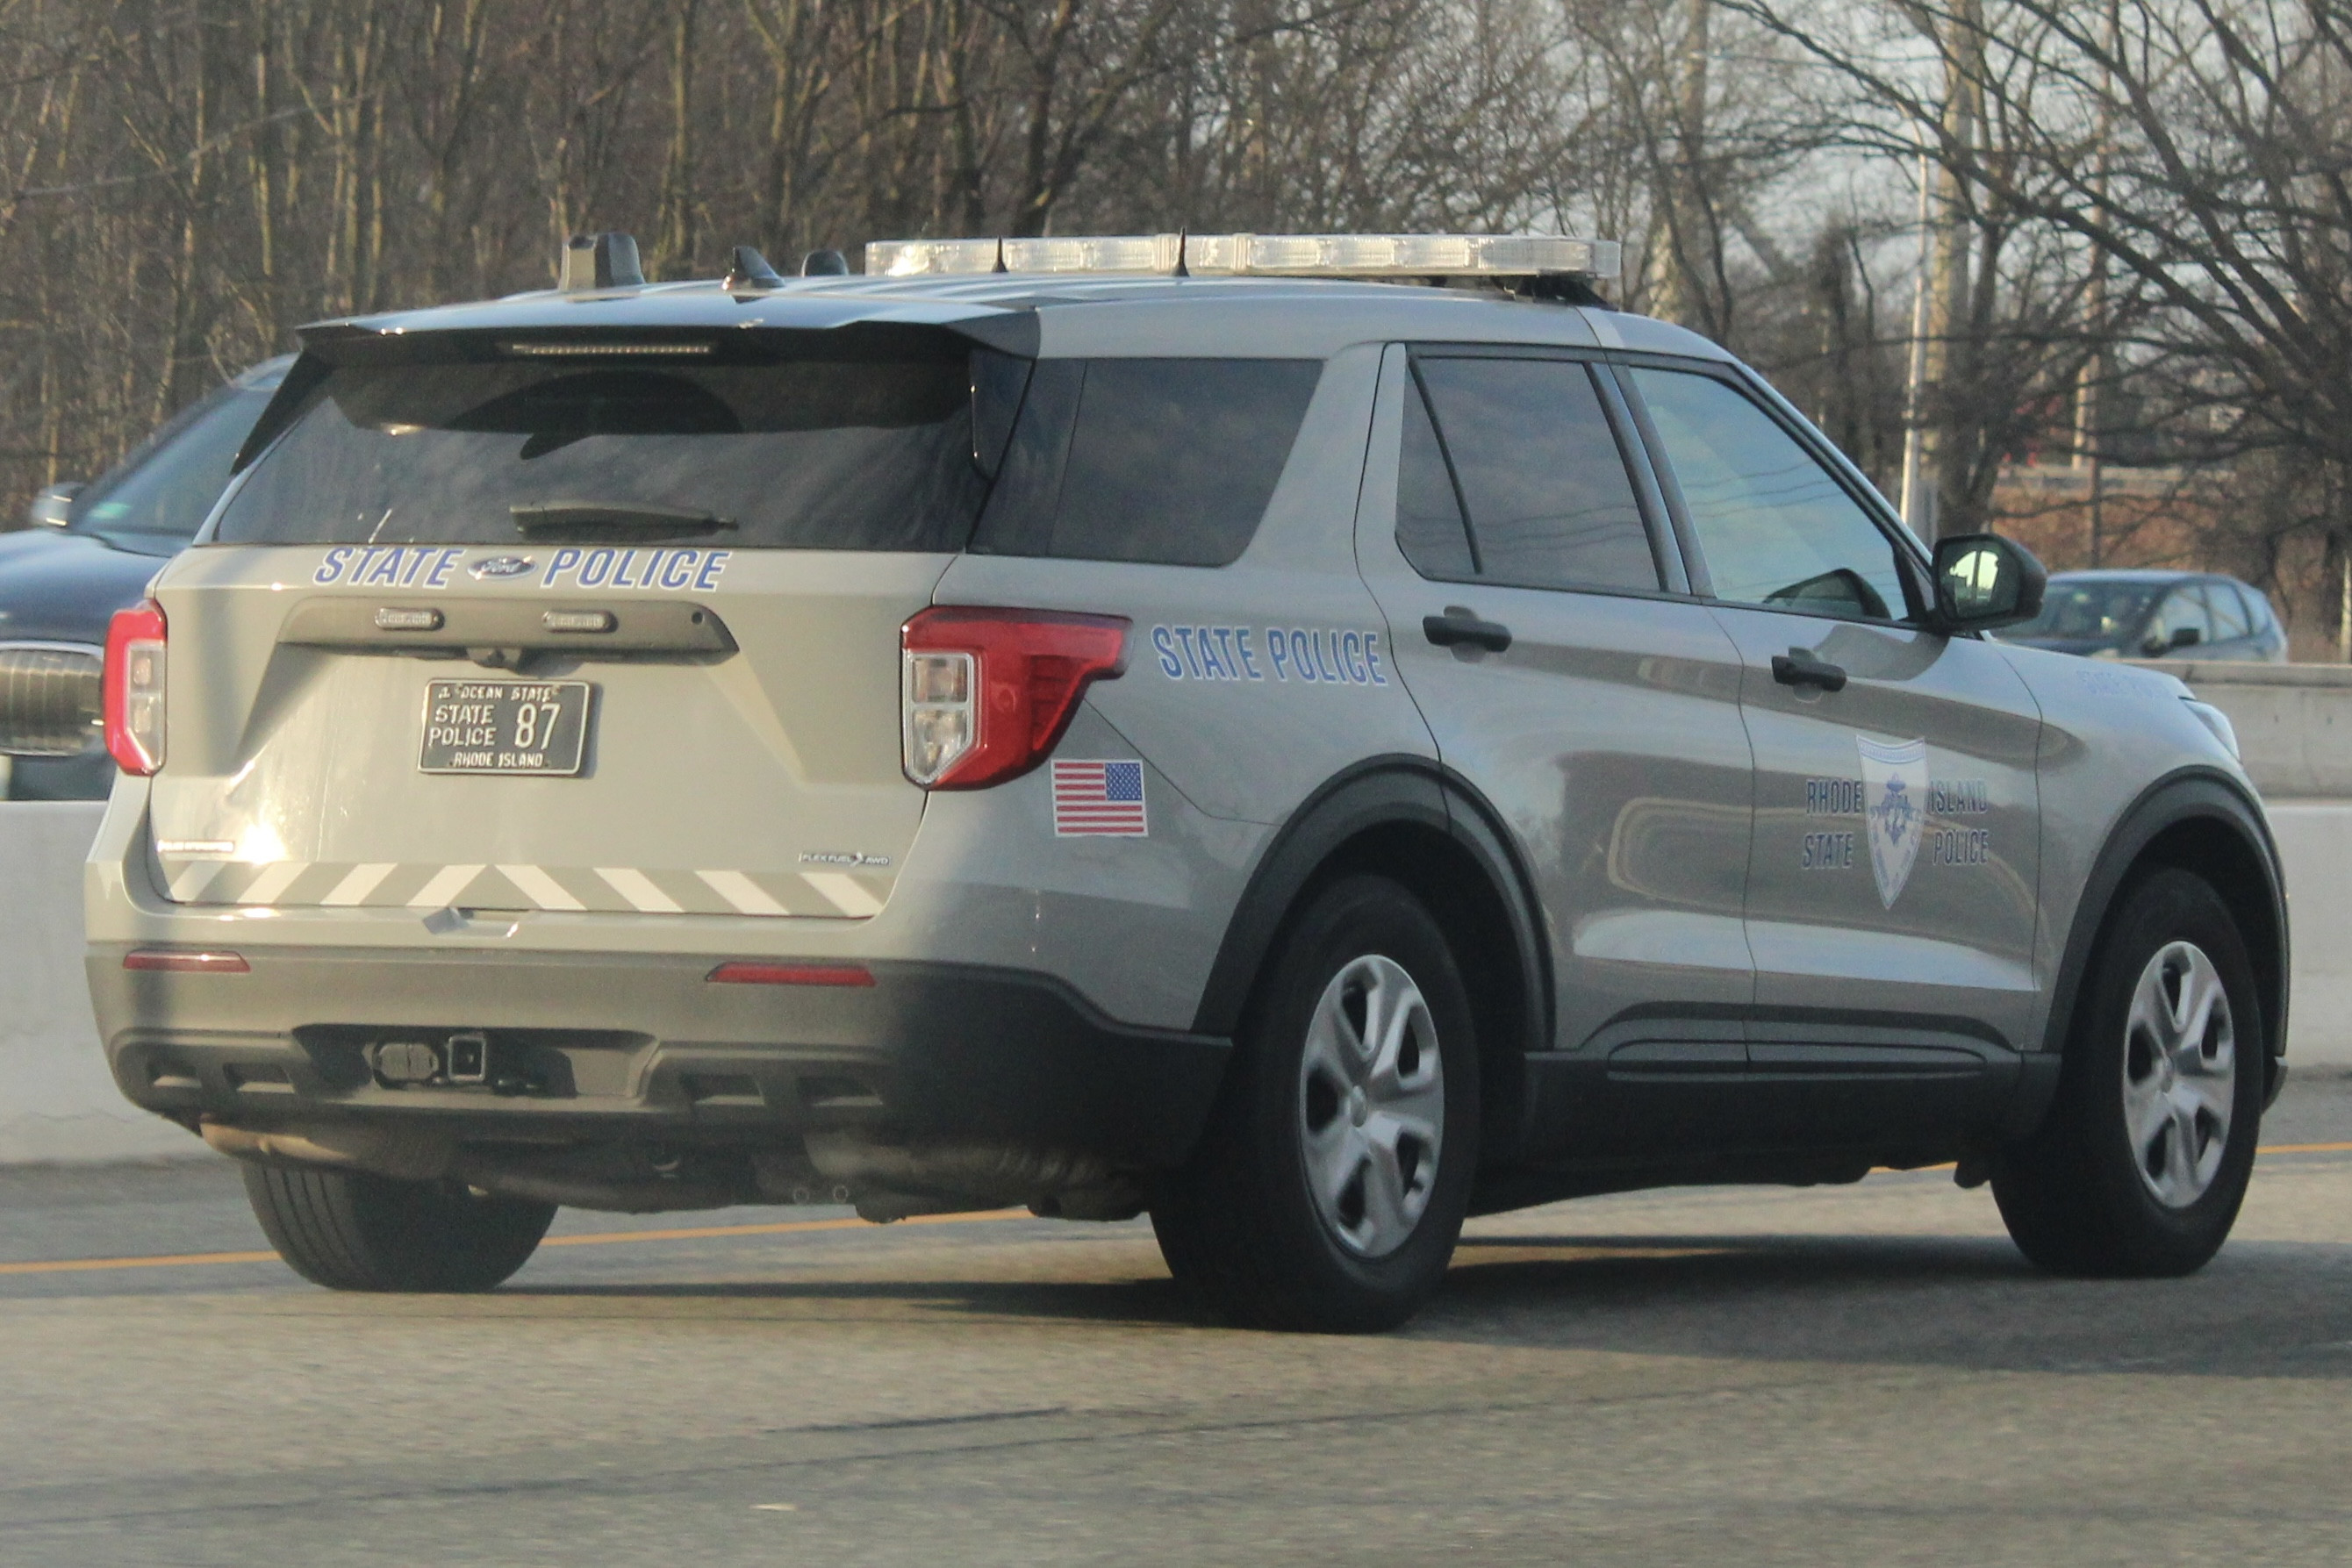 A photo  of Rhode Island State Police
            Cruiser 87, a 2020 Ford Police Interceptor Utility             taken by @riemergencyvehicles